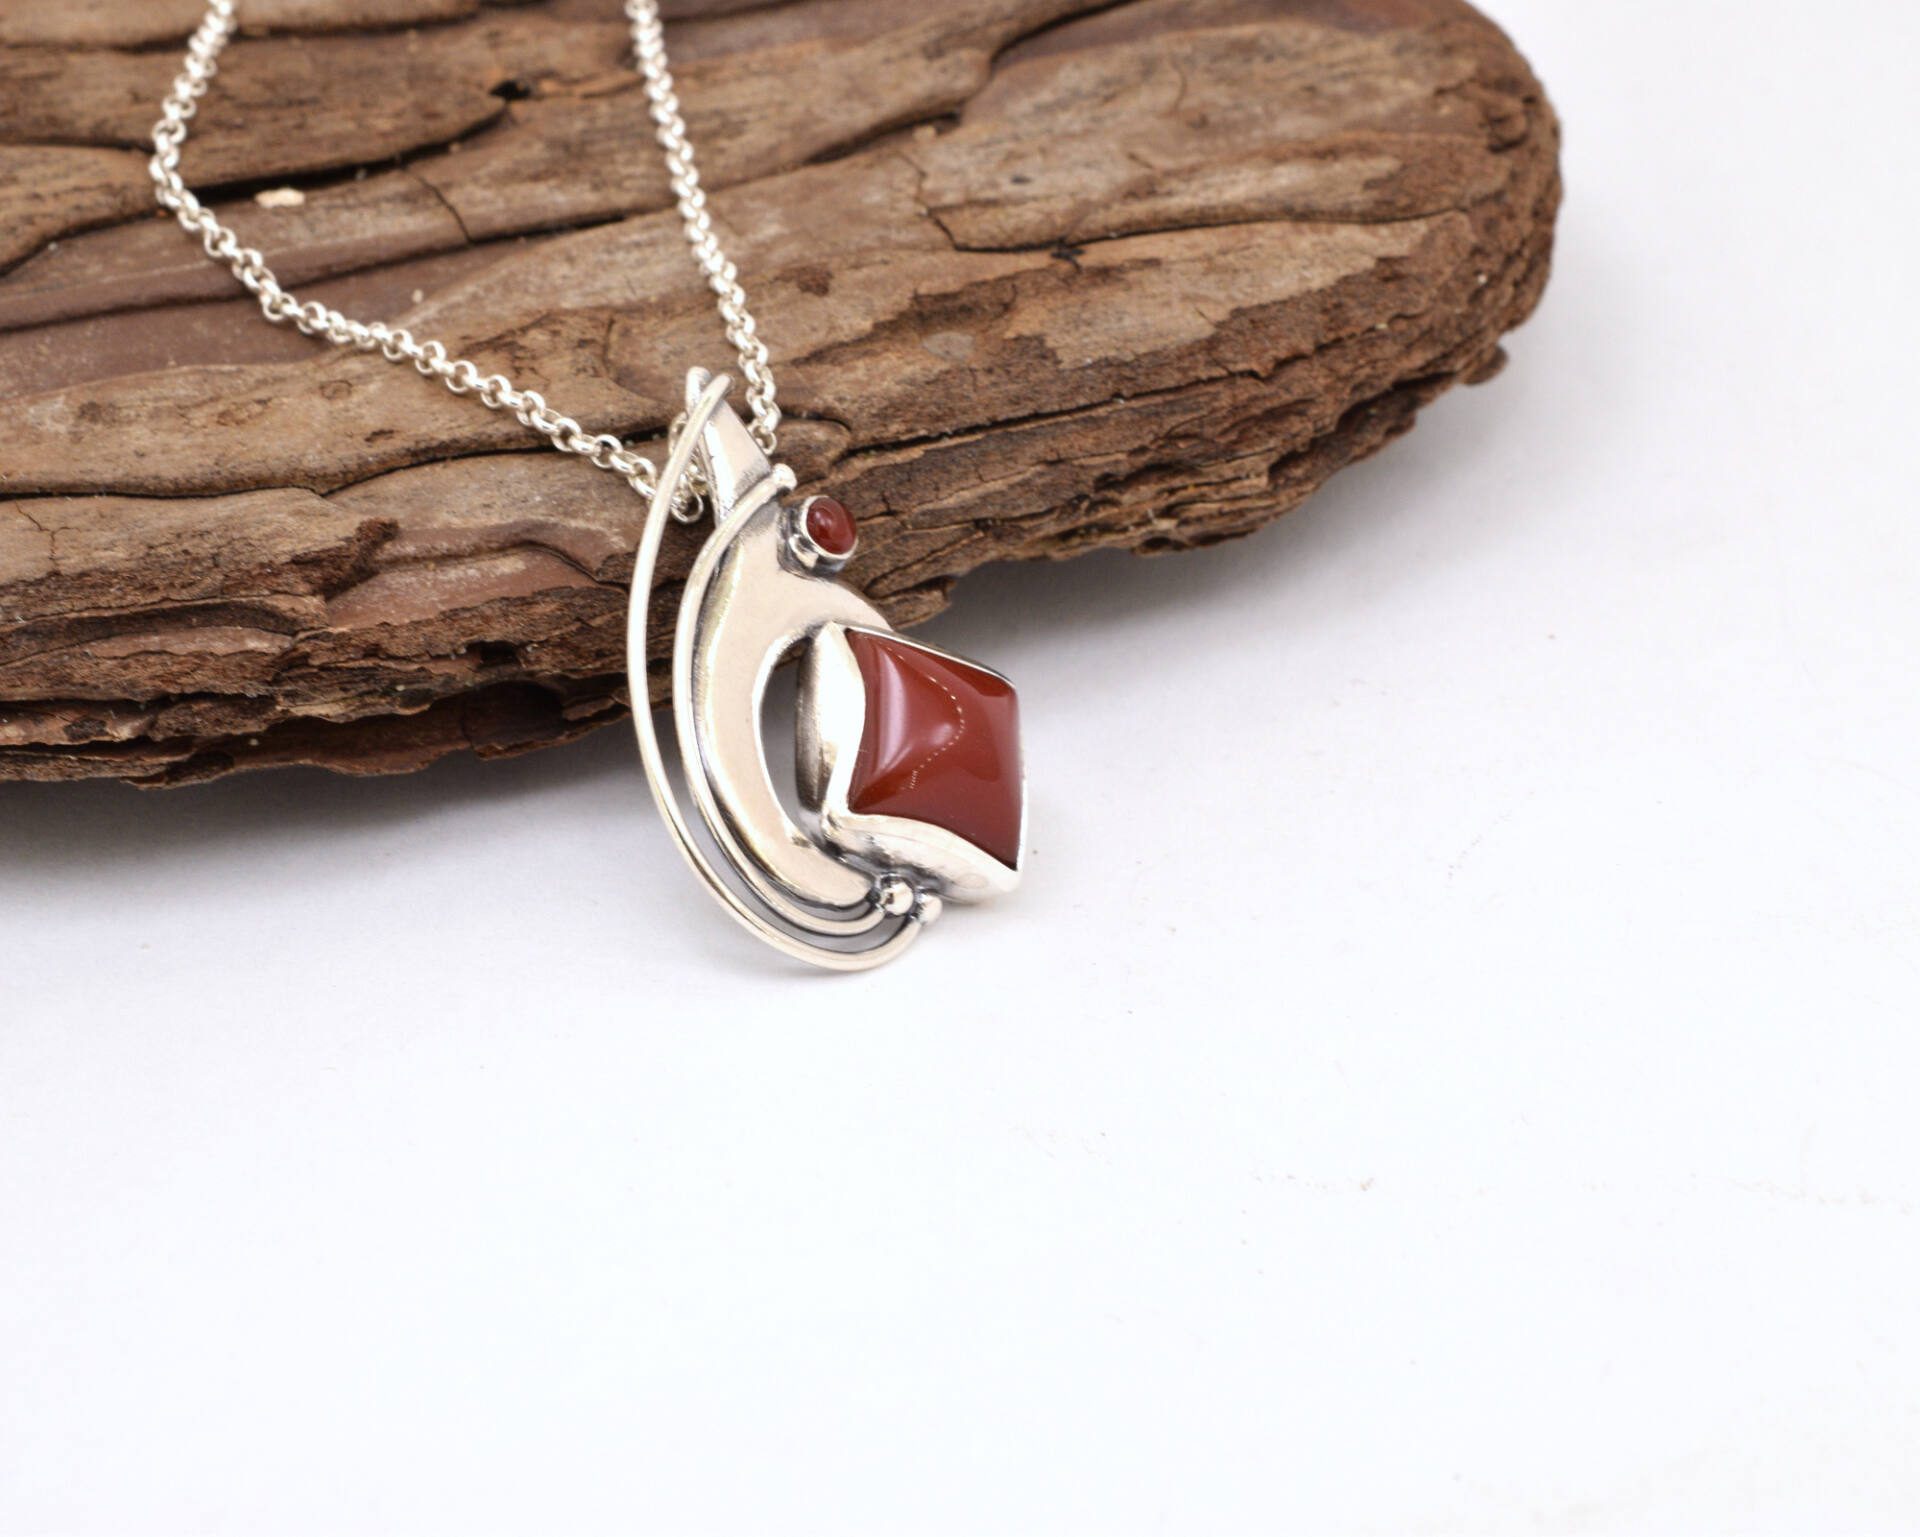 Carnelian necklace from sterling silver